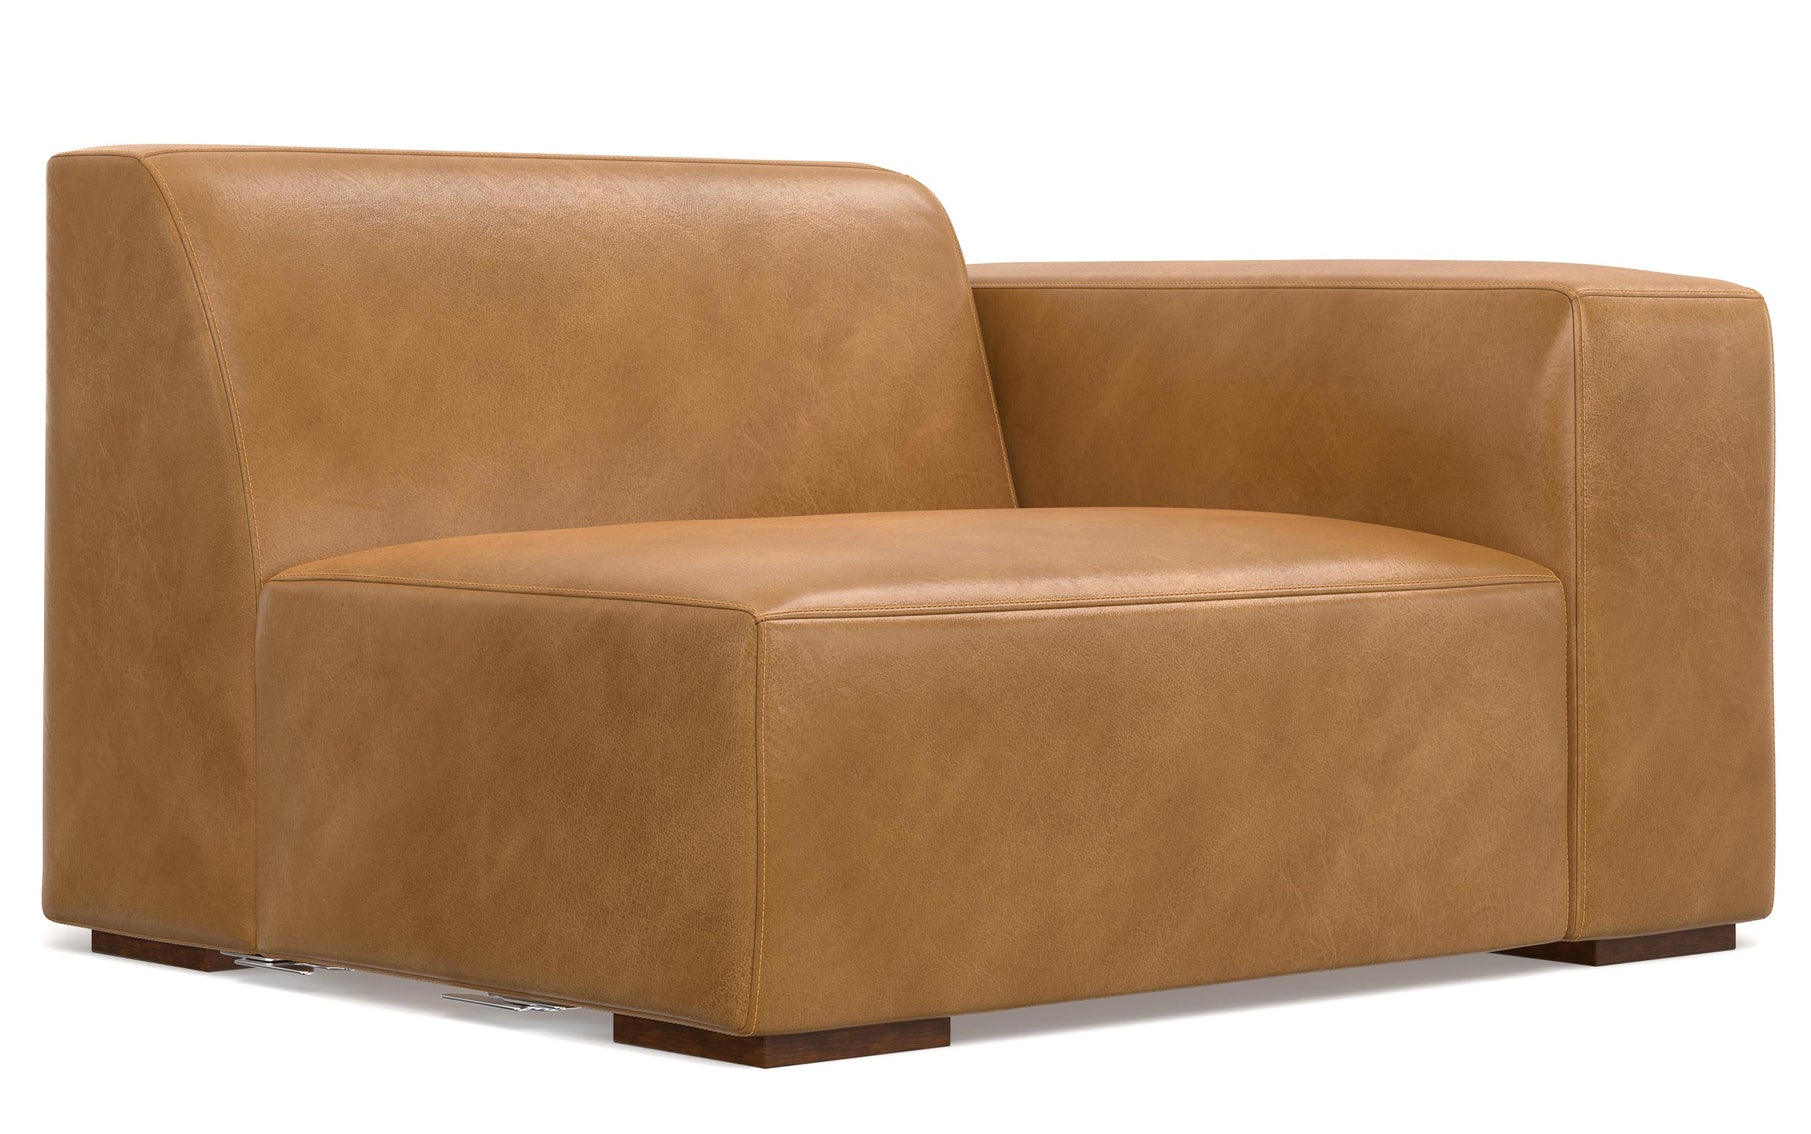 Sienna Genuine Leather | Rex 2 Seater Sofa and Left Chaise in Genuine Leather